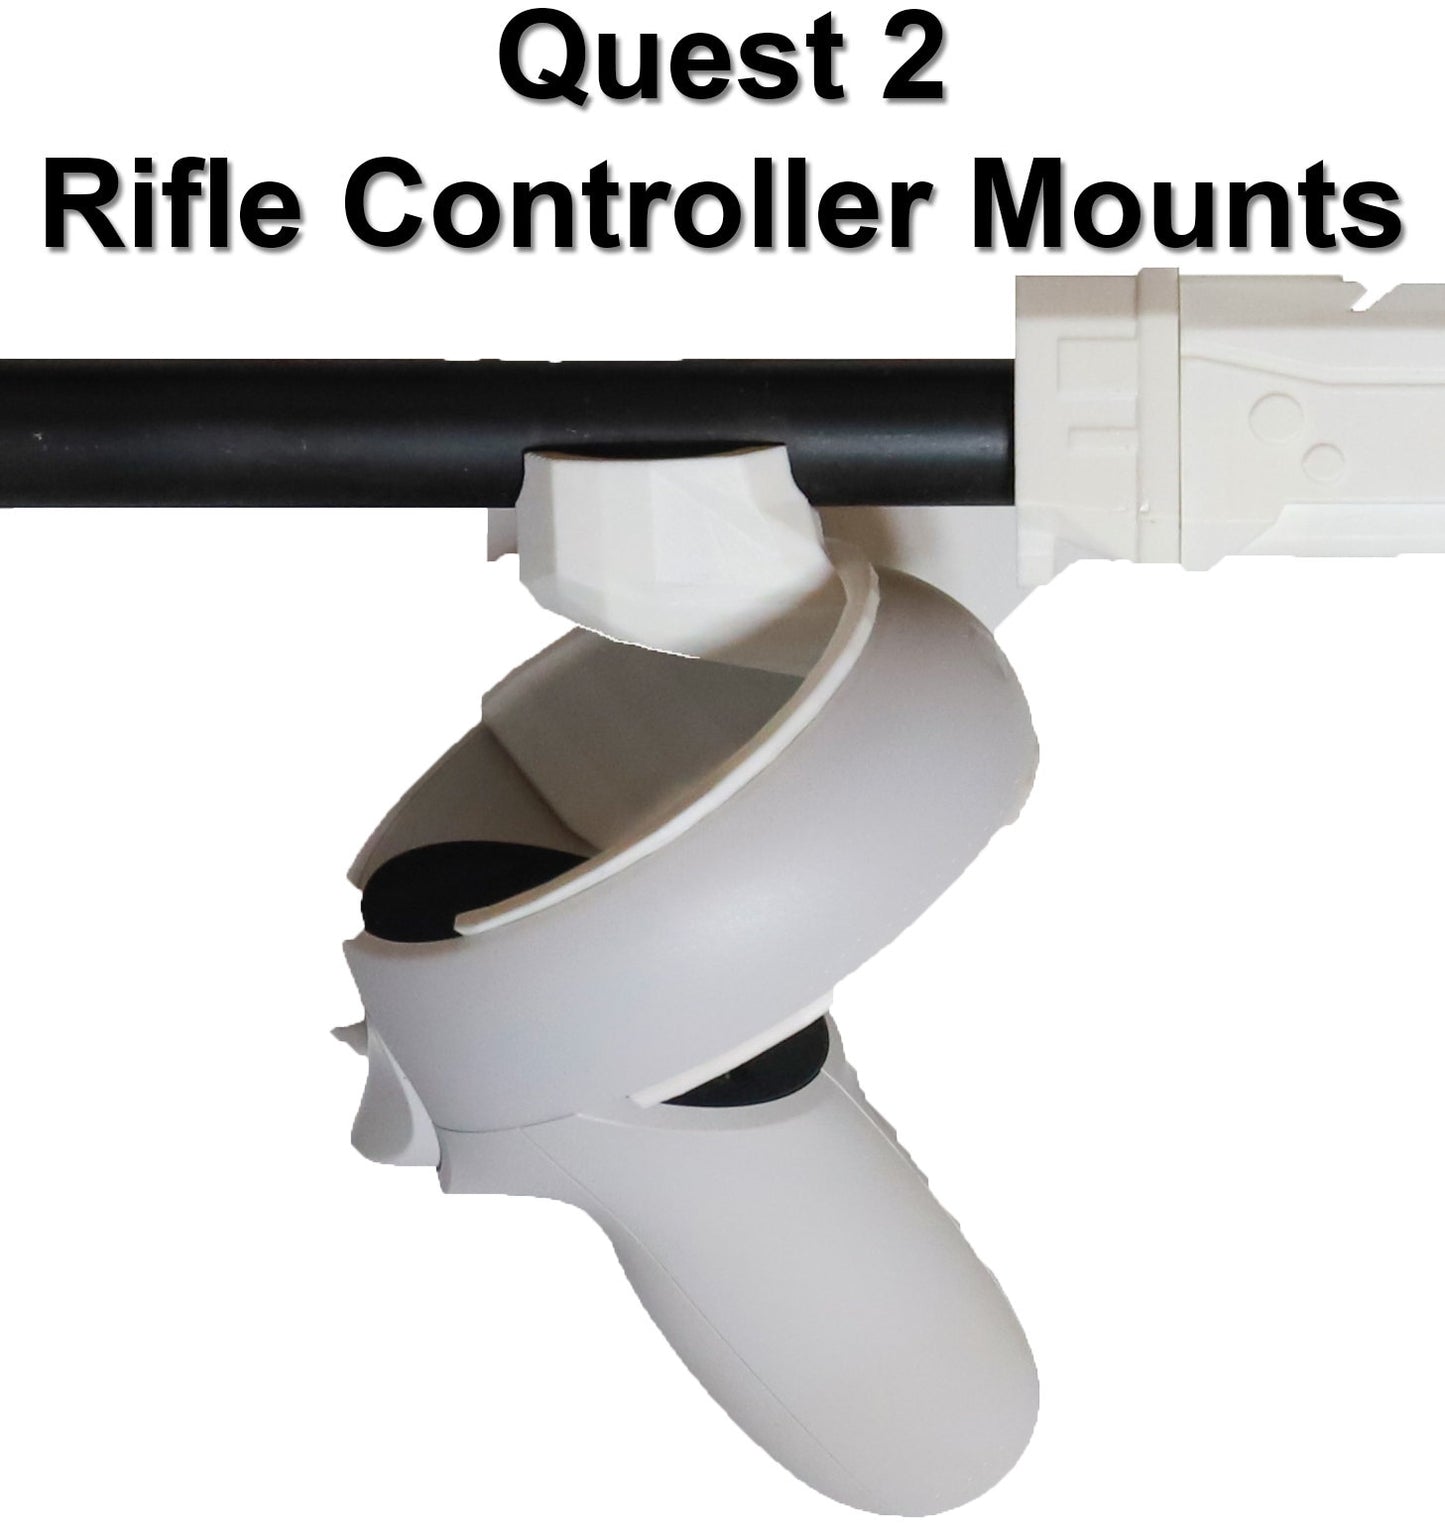 Meta Quest 1 or 2 Rifle Controller Mounts (mounts ONLY, rifle stock not included).